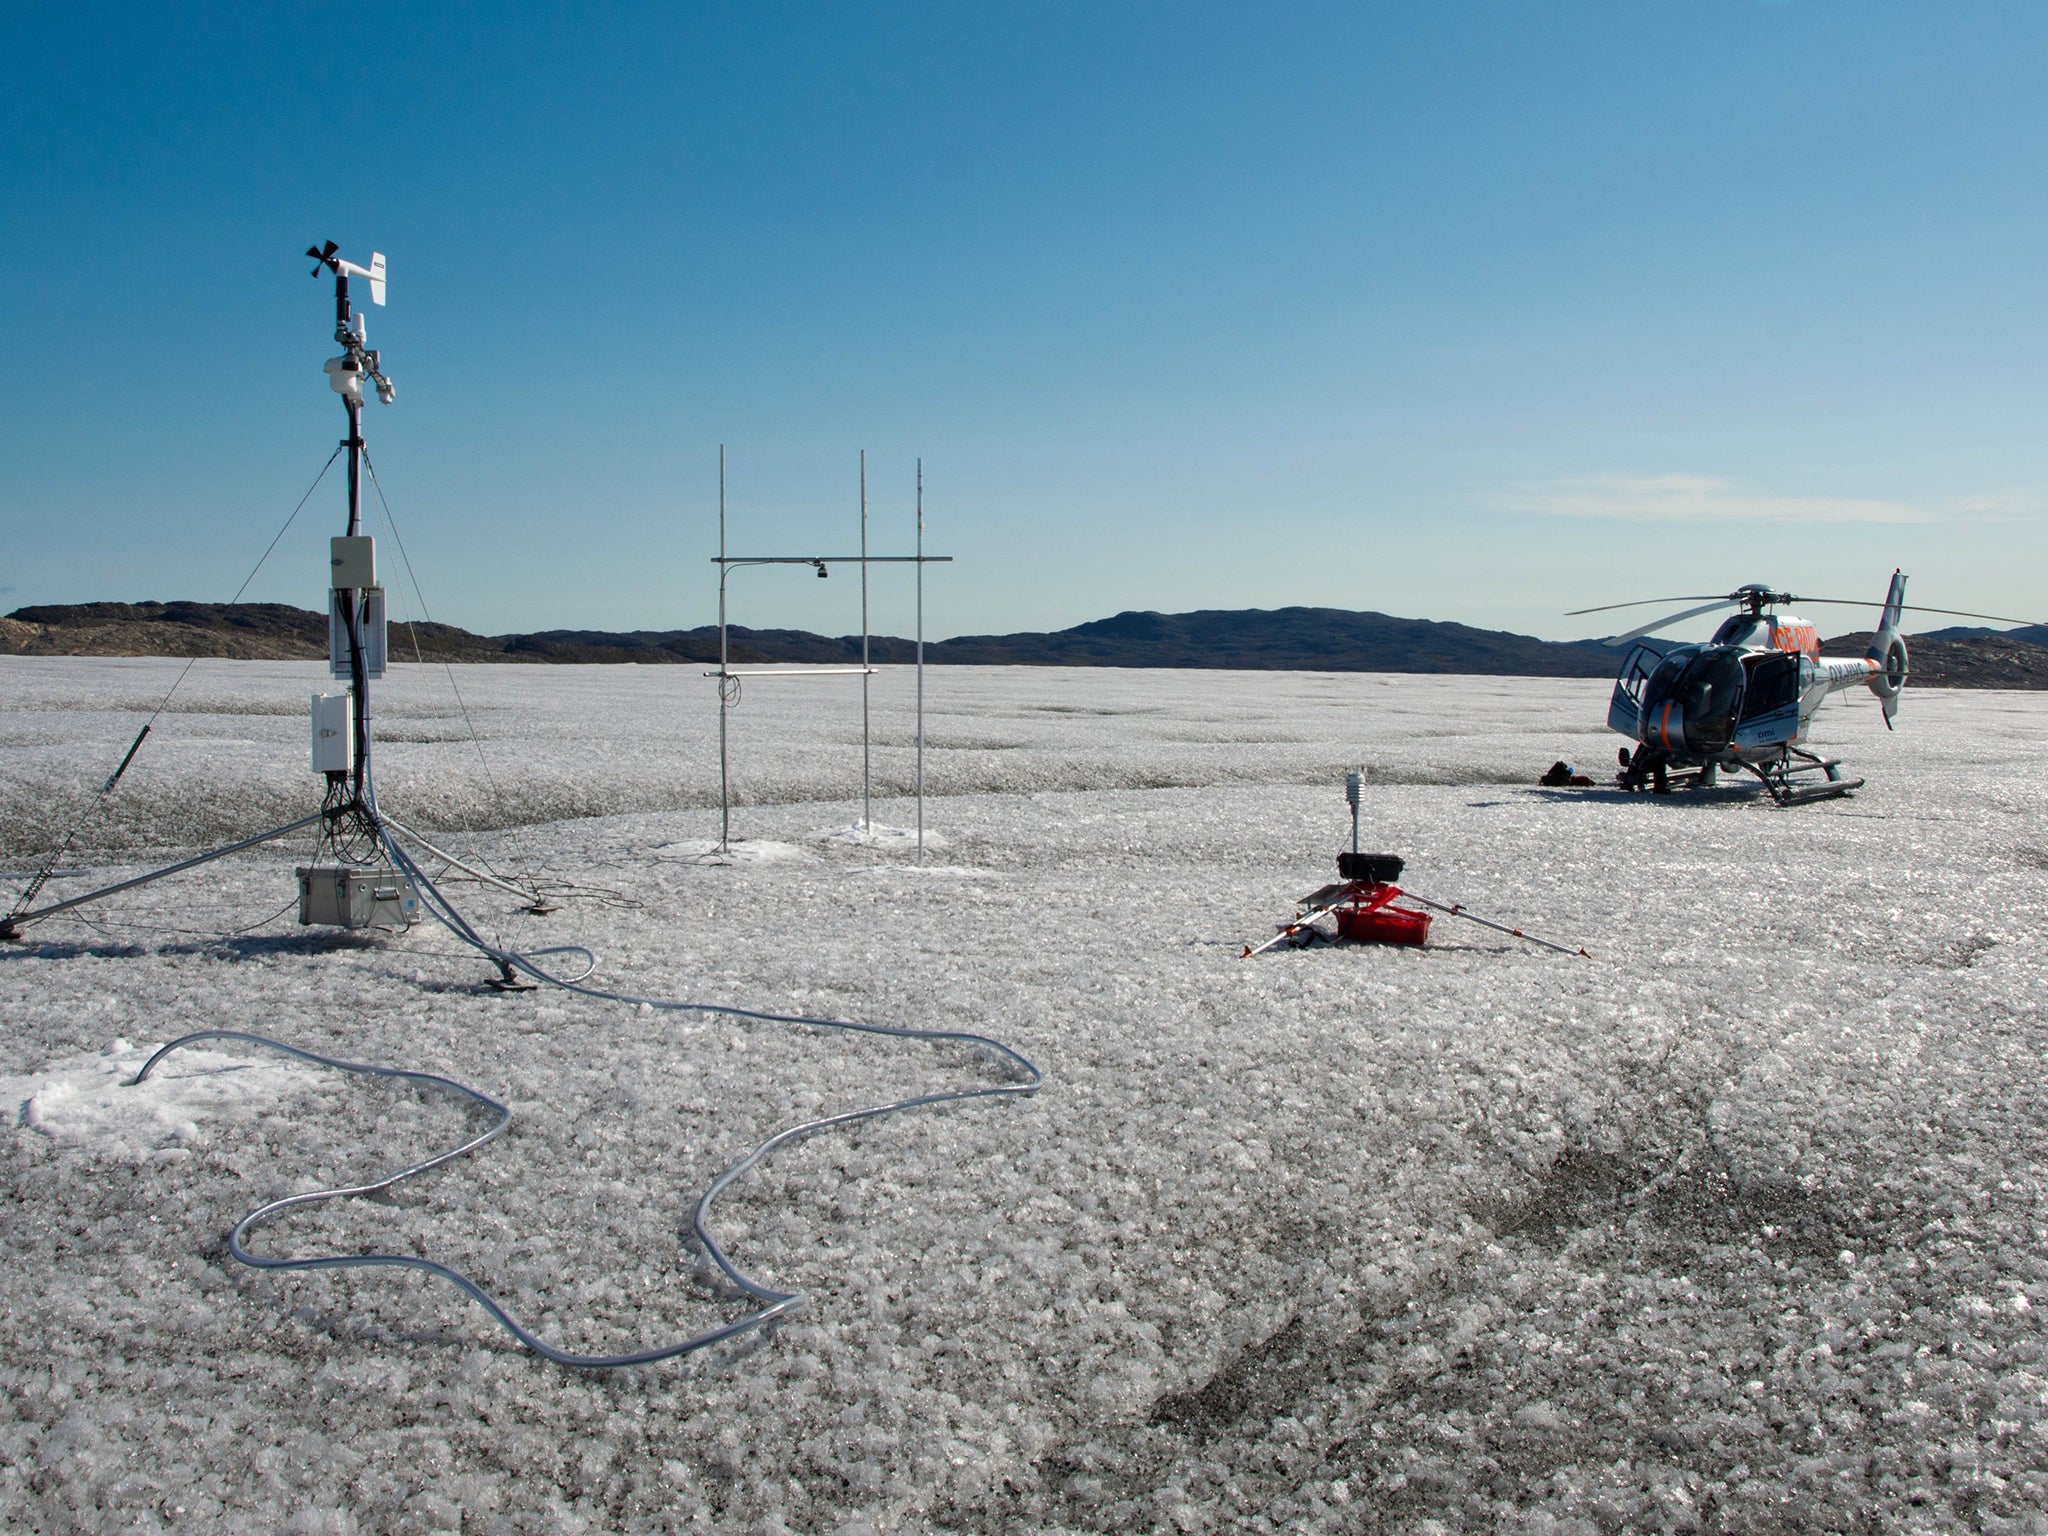 The Dark Snow Project’s most recent Greenland expedition has shown a rapid spread in heat-absorbing dark ice